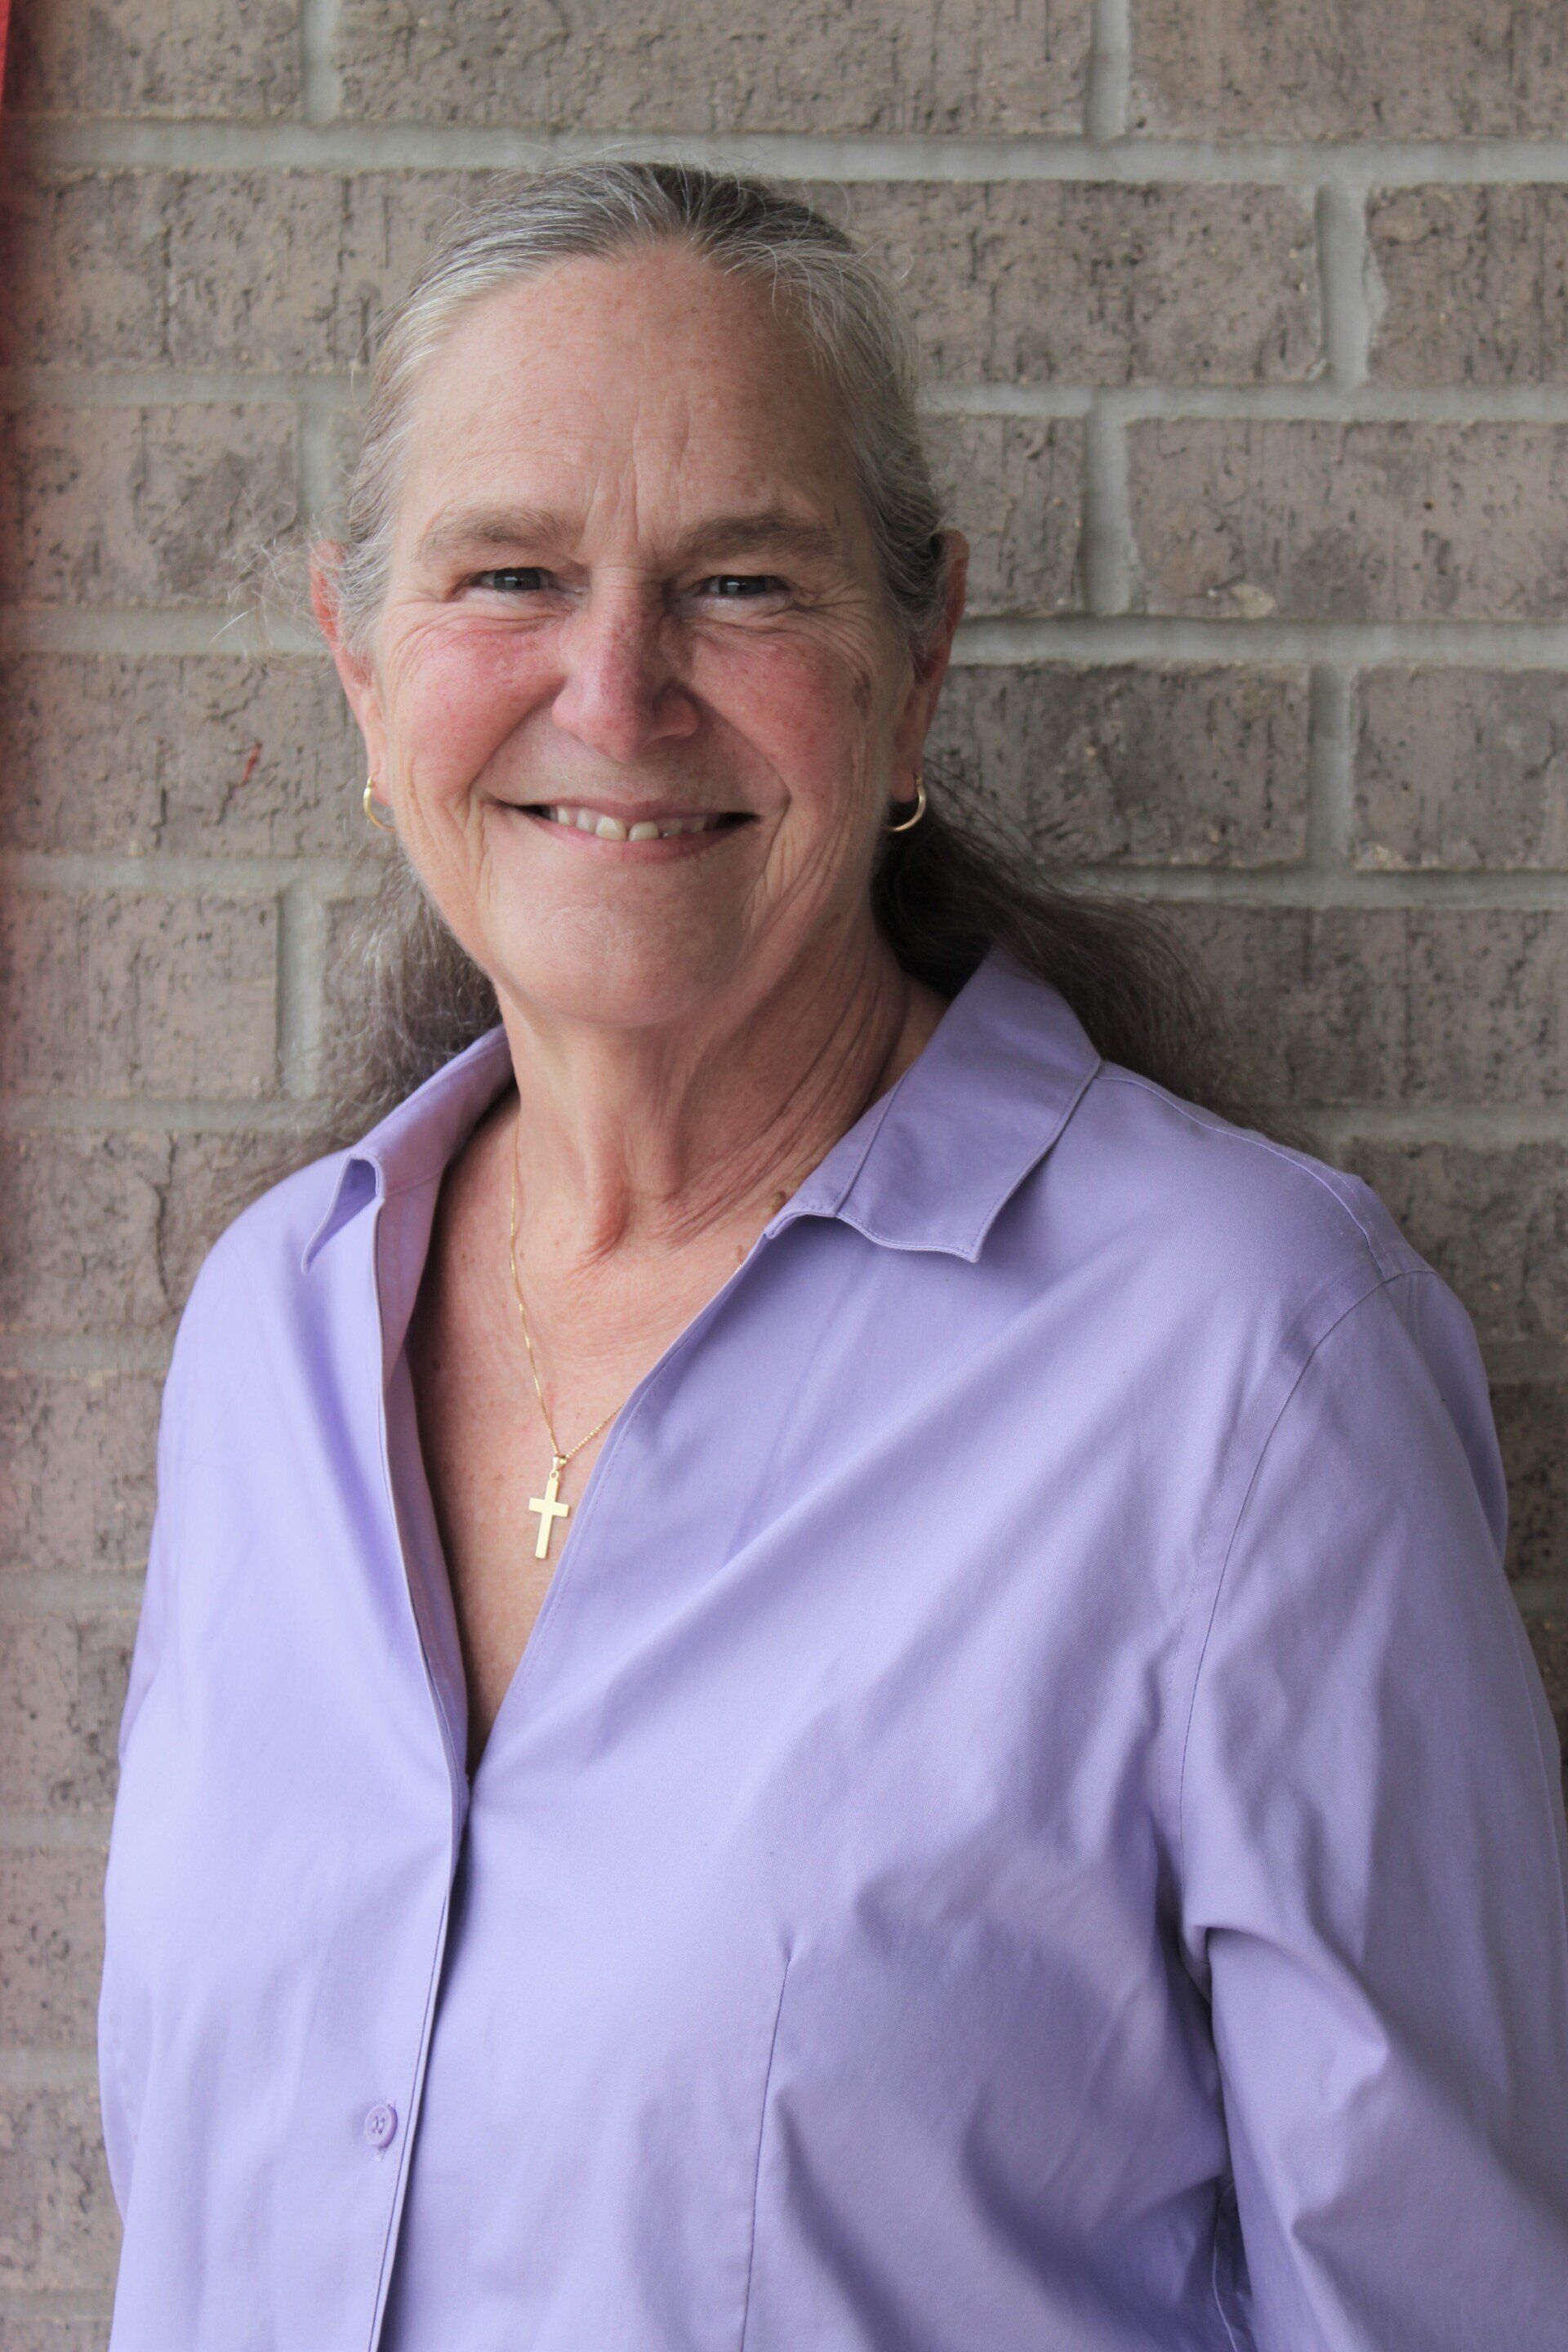 Anne Meyer is a white woman with salt-and-pepper hair pulled back in a ponytail. She is wearing a lavender shirt and a necklace with a gold cross pendant.